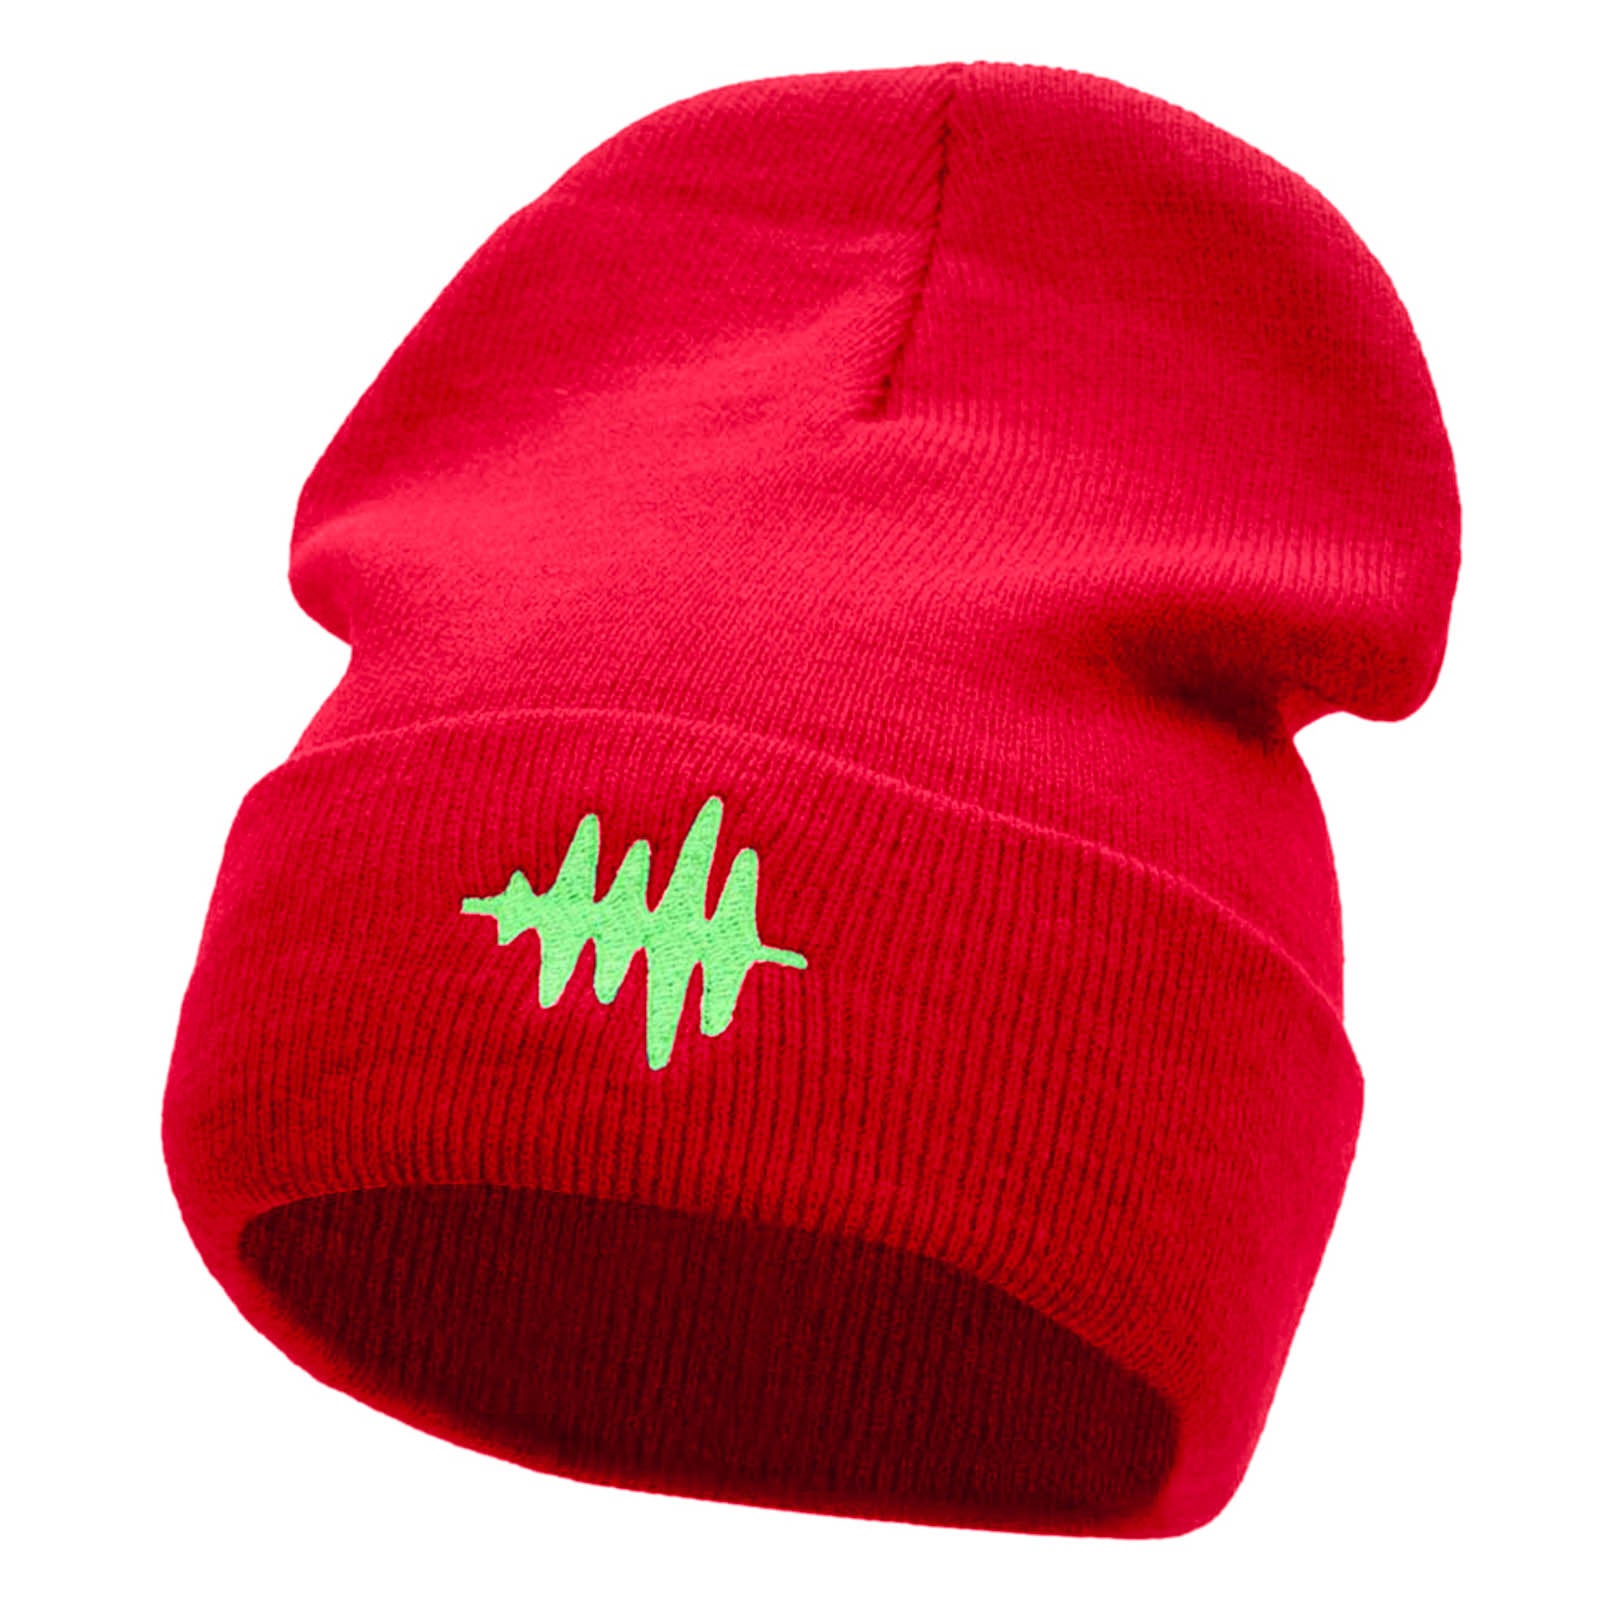 Sound Wave Embroidered 12 Inch Long Knitted Beanie - Red OSFM